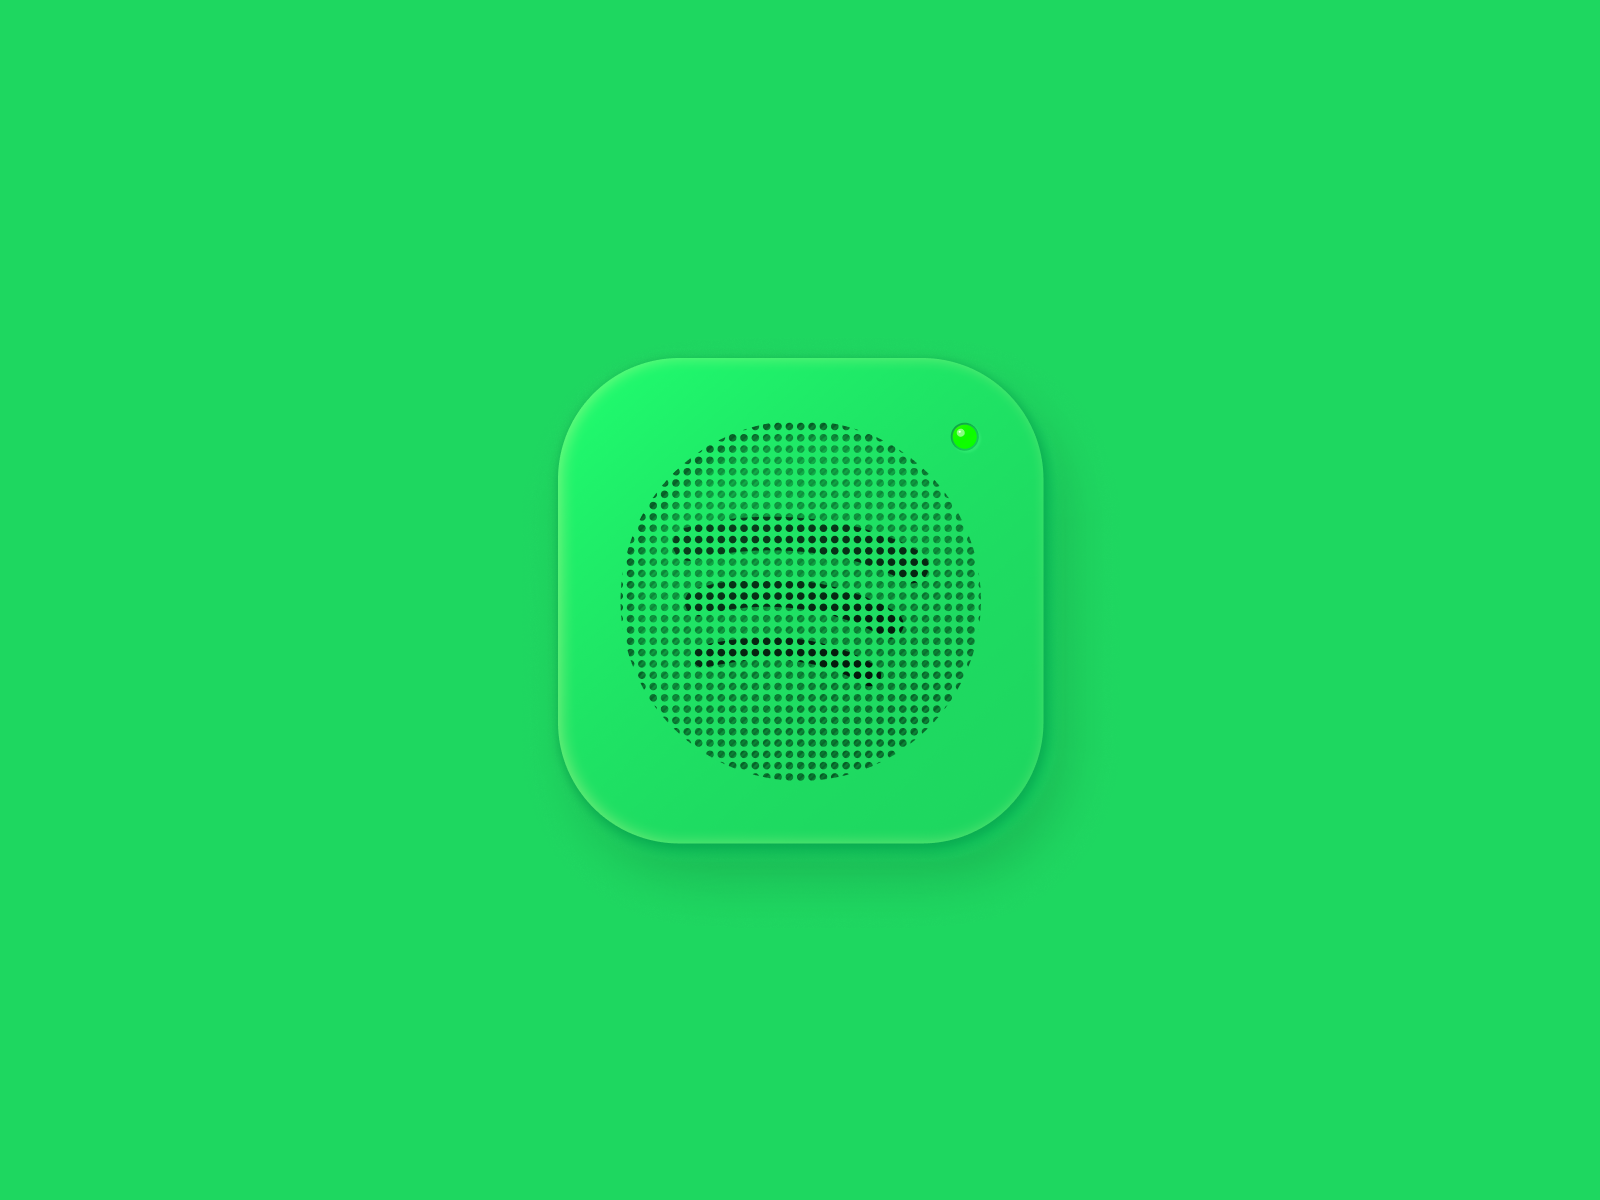 Spotify icon - Free download on Iconfinder